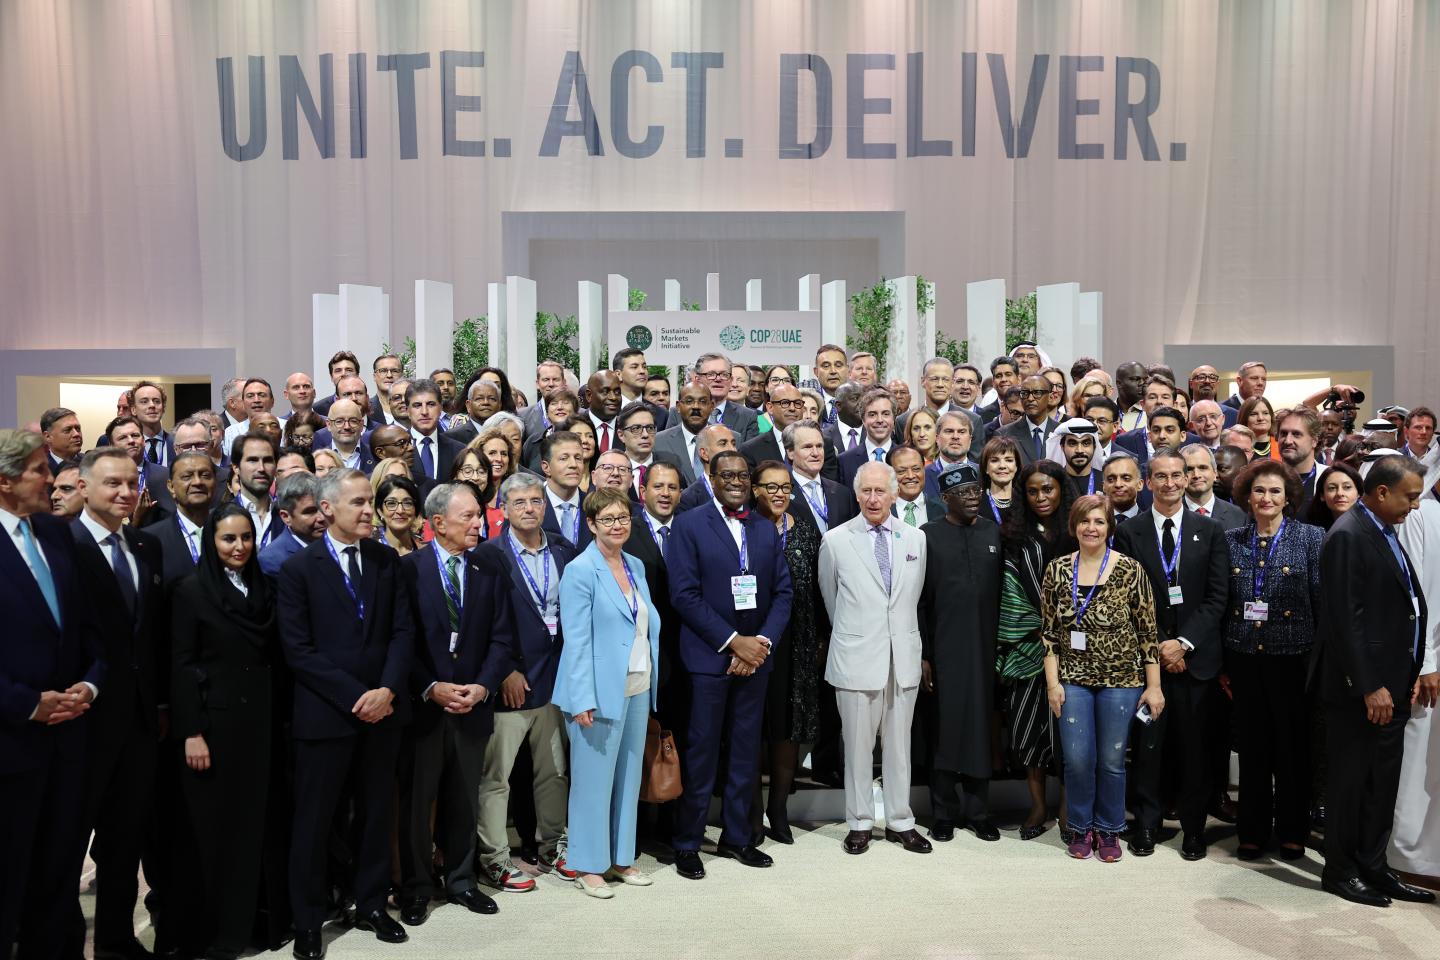 A large group of world leaders standing in front of a sign that says "Unite. Act. Deliver." at COP28